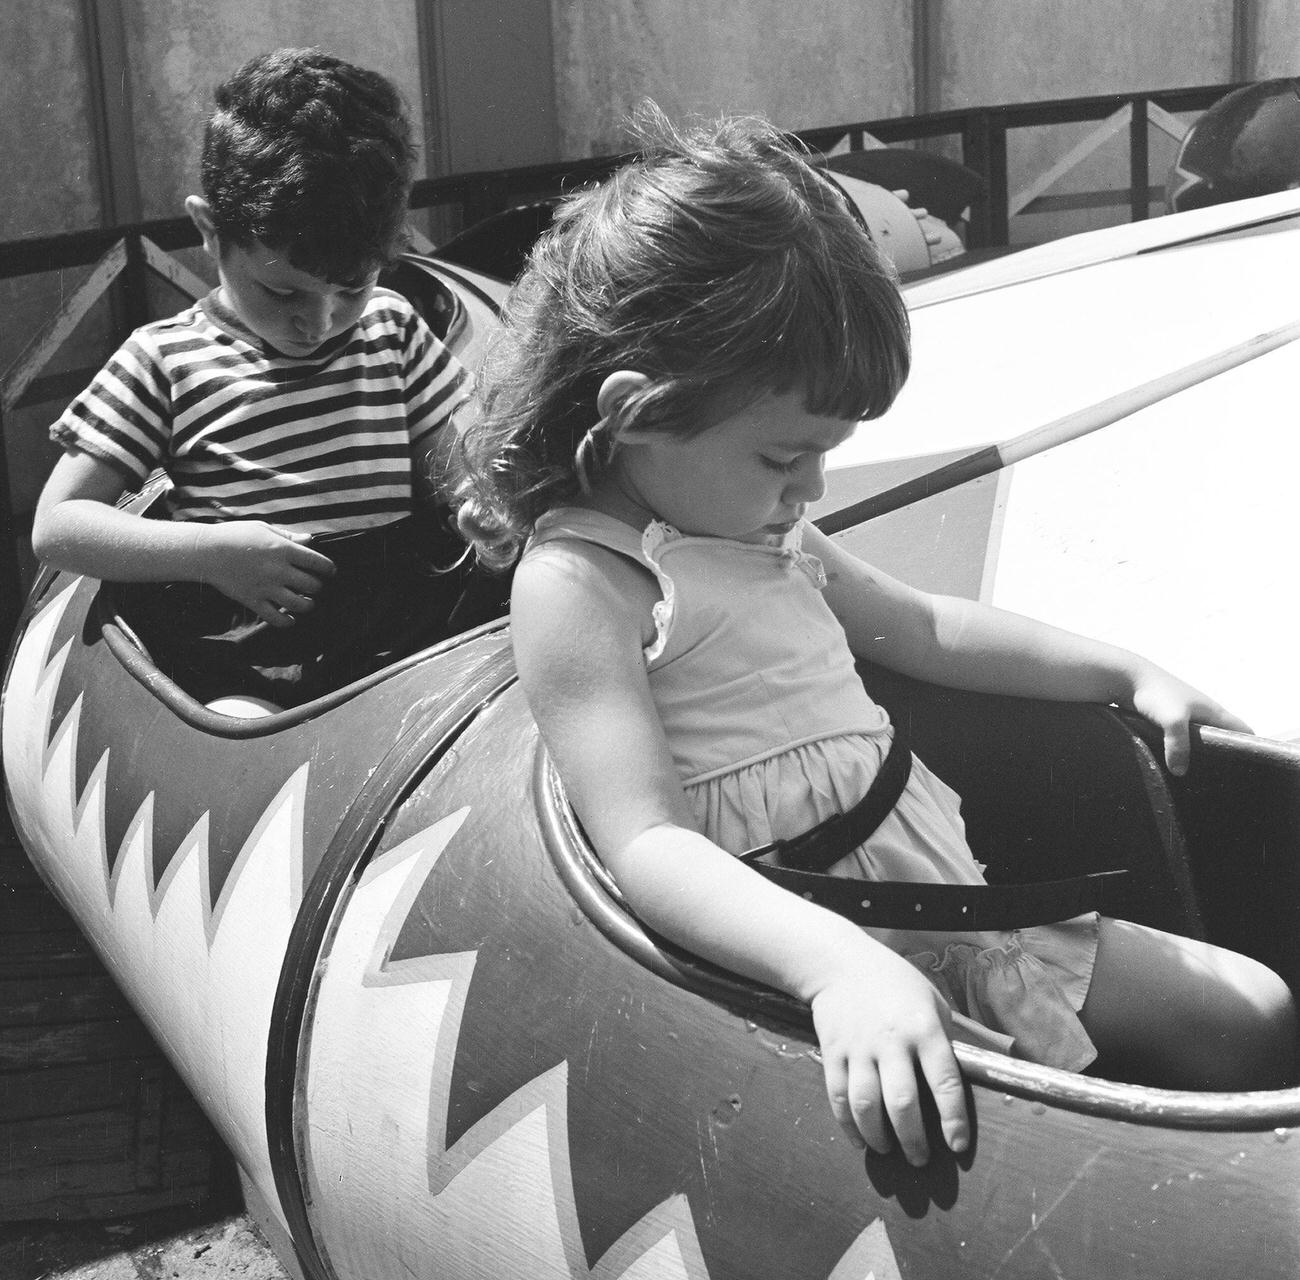 Siblings Sit In An Amusement Park Ride At Coney Island, 1948